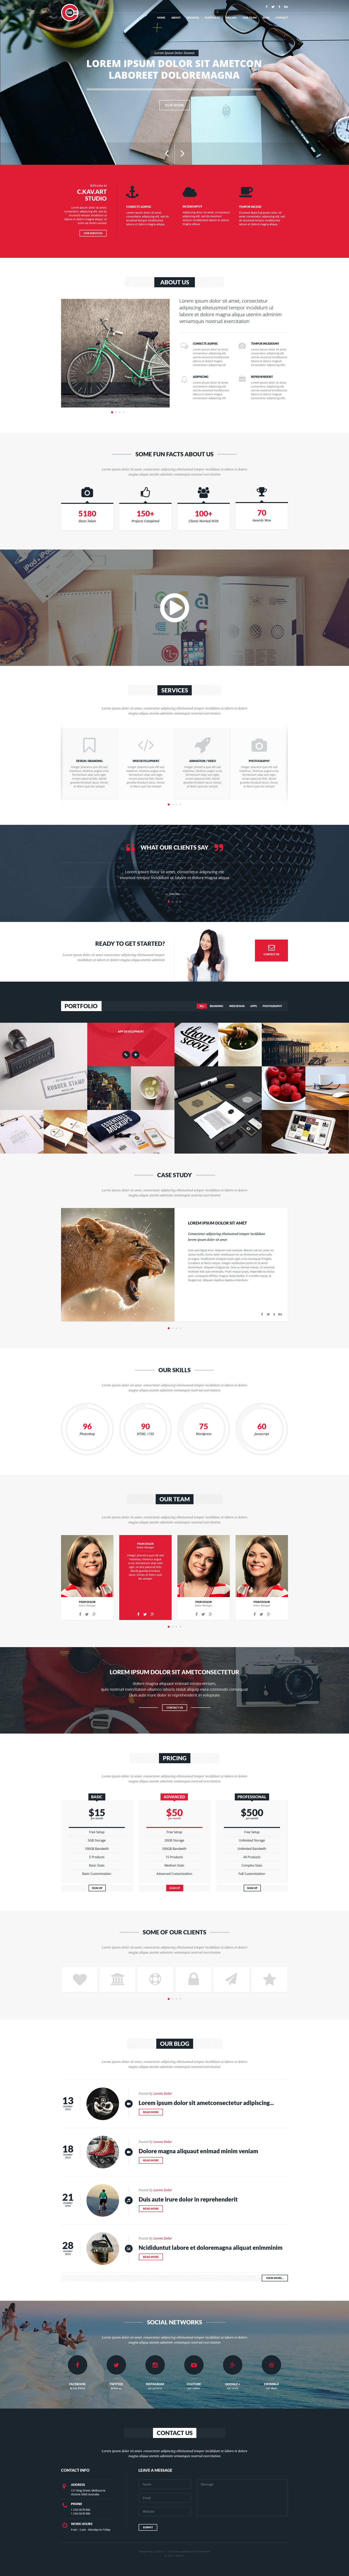 C.Kav - Opus One Page PSD Template